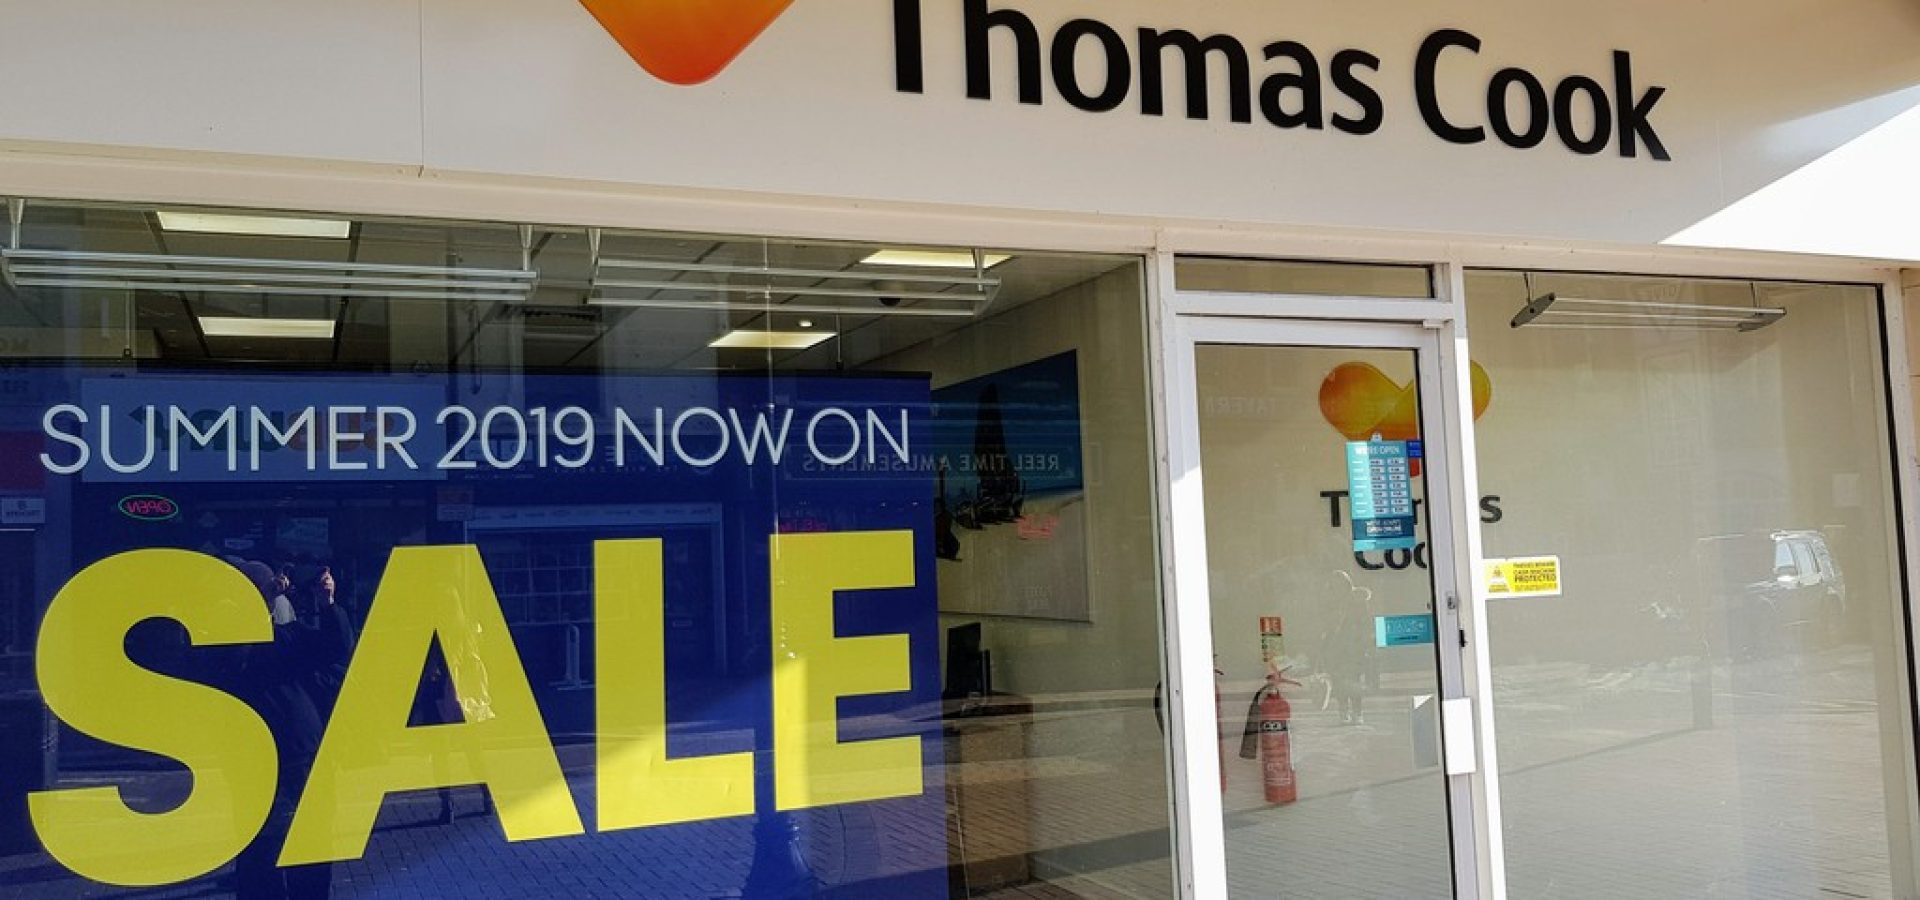 Thomas Cook and its finances